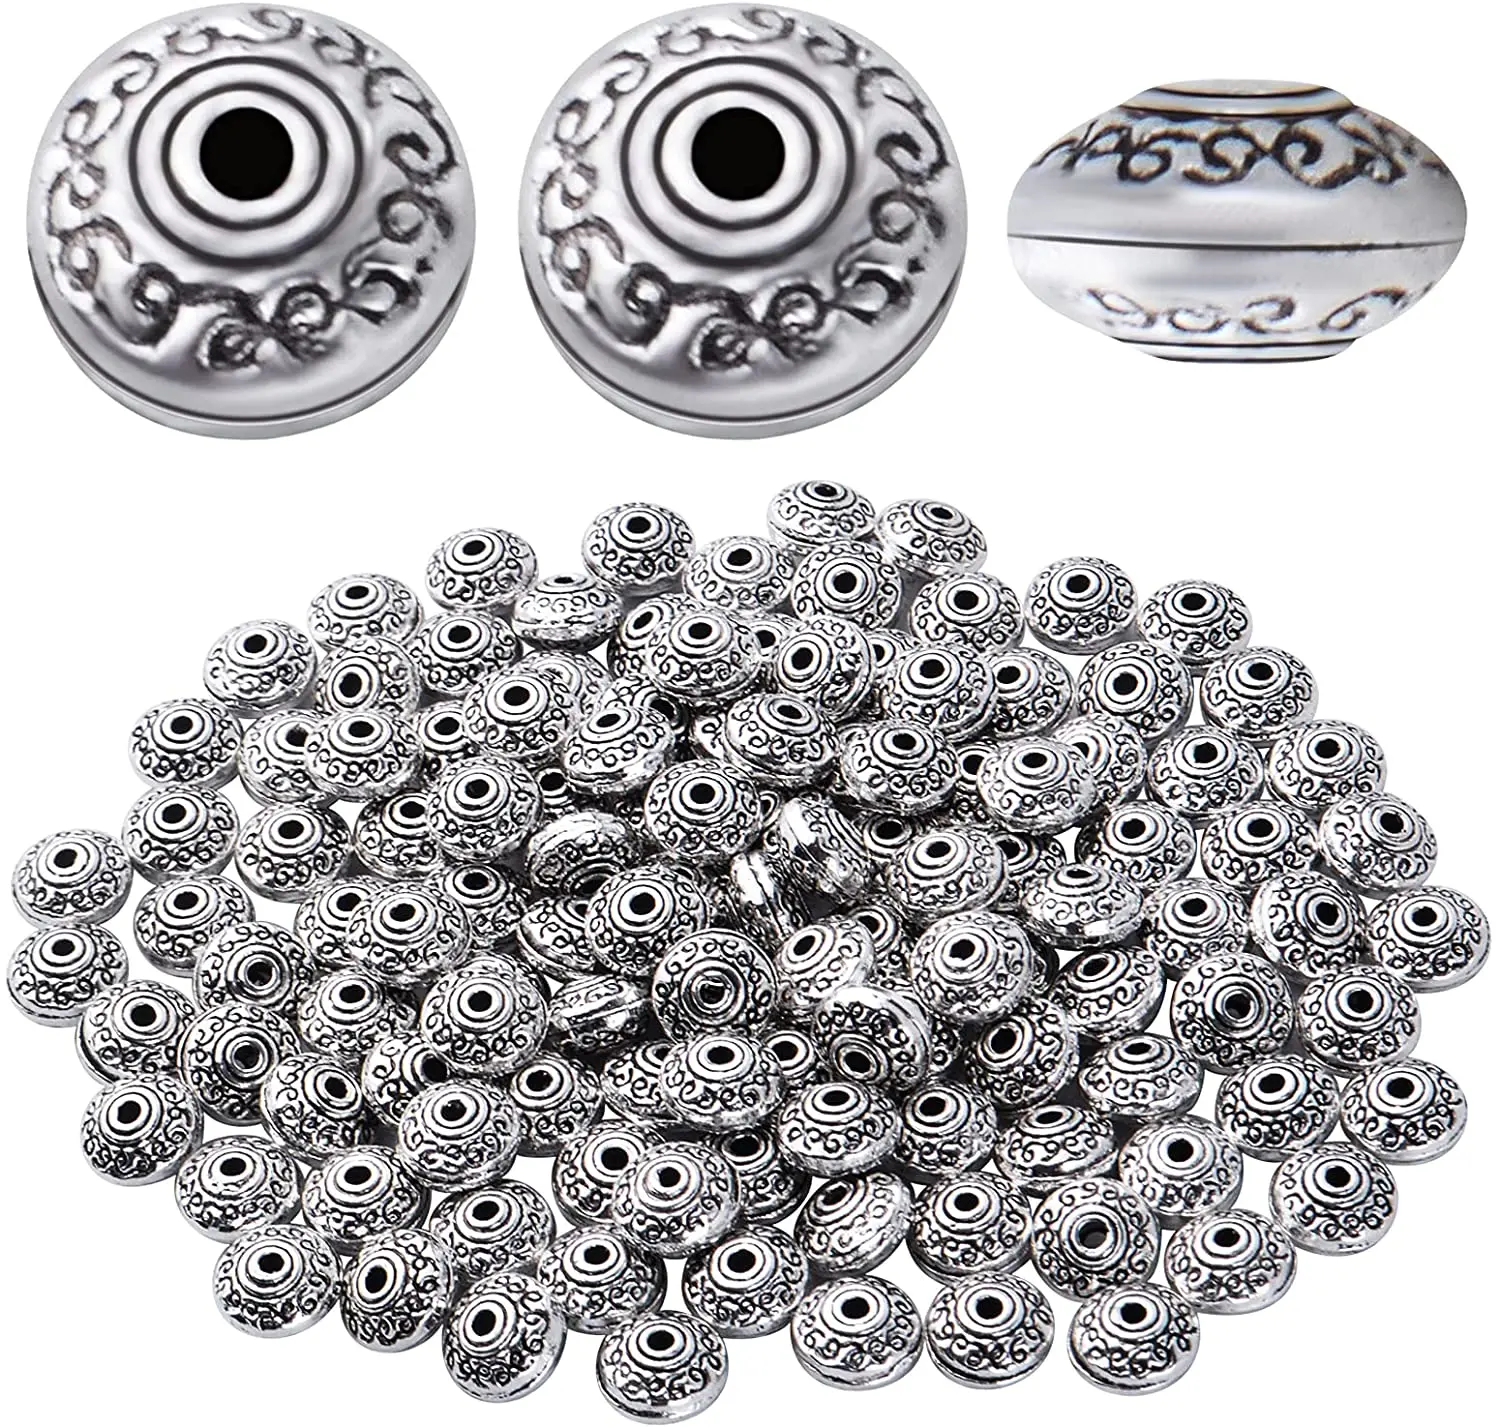 

120pcs Antique Silver Bicone Spacer Beads Alloy Tibetan Saucer Spacer Loose Charm Beads for DIY Bracelet Jewelry Making Crafting